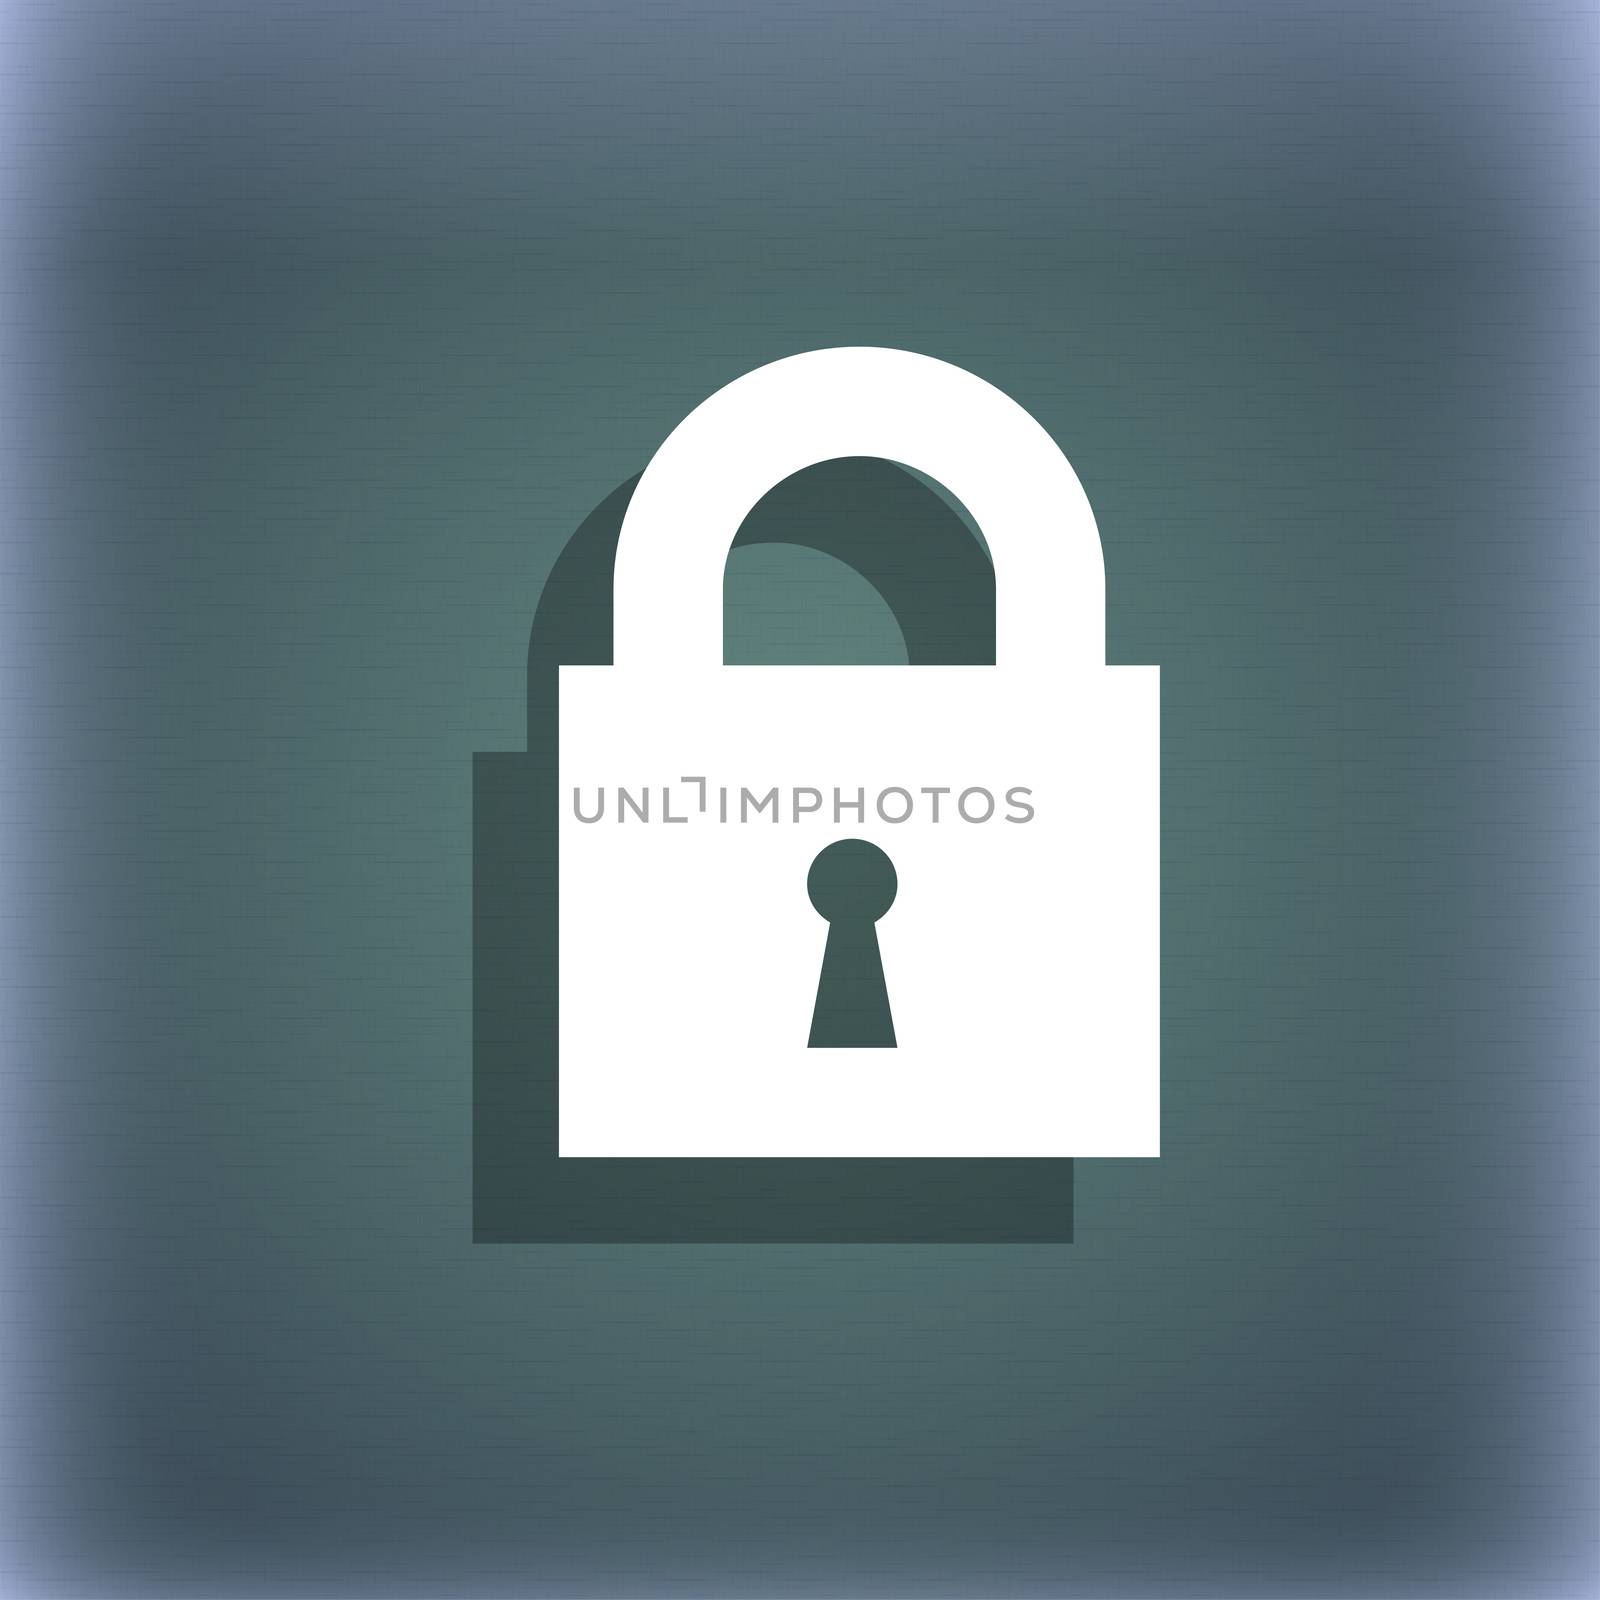 closed lock icon symbol on the blue-green abstract background with shadow and space for your text. illustration